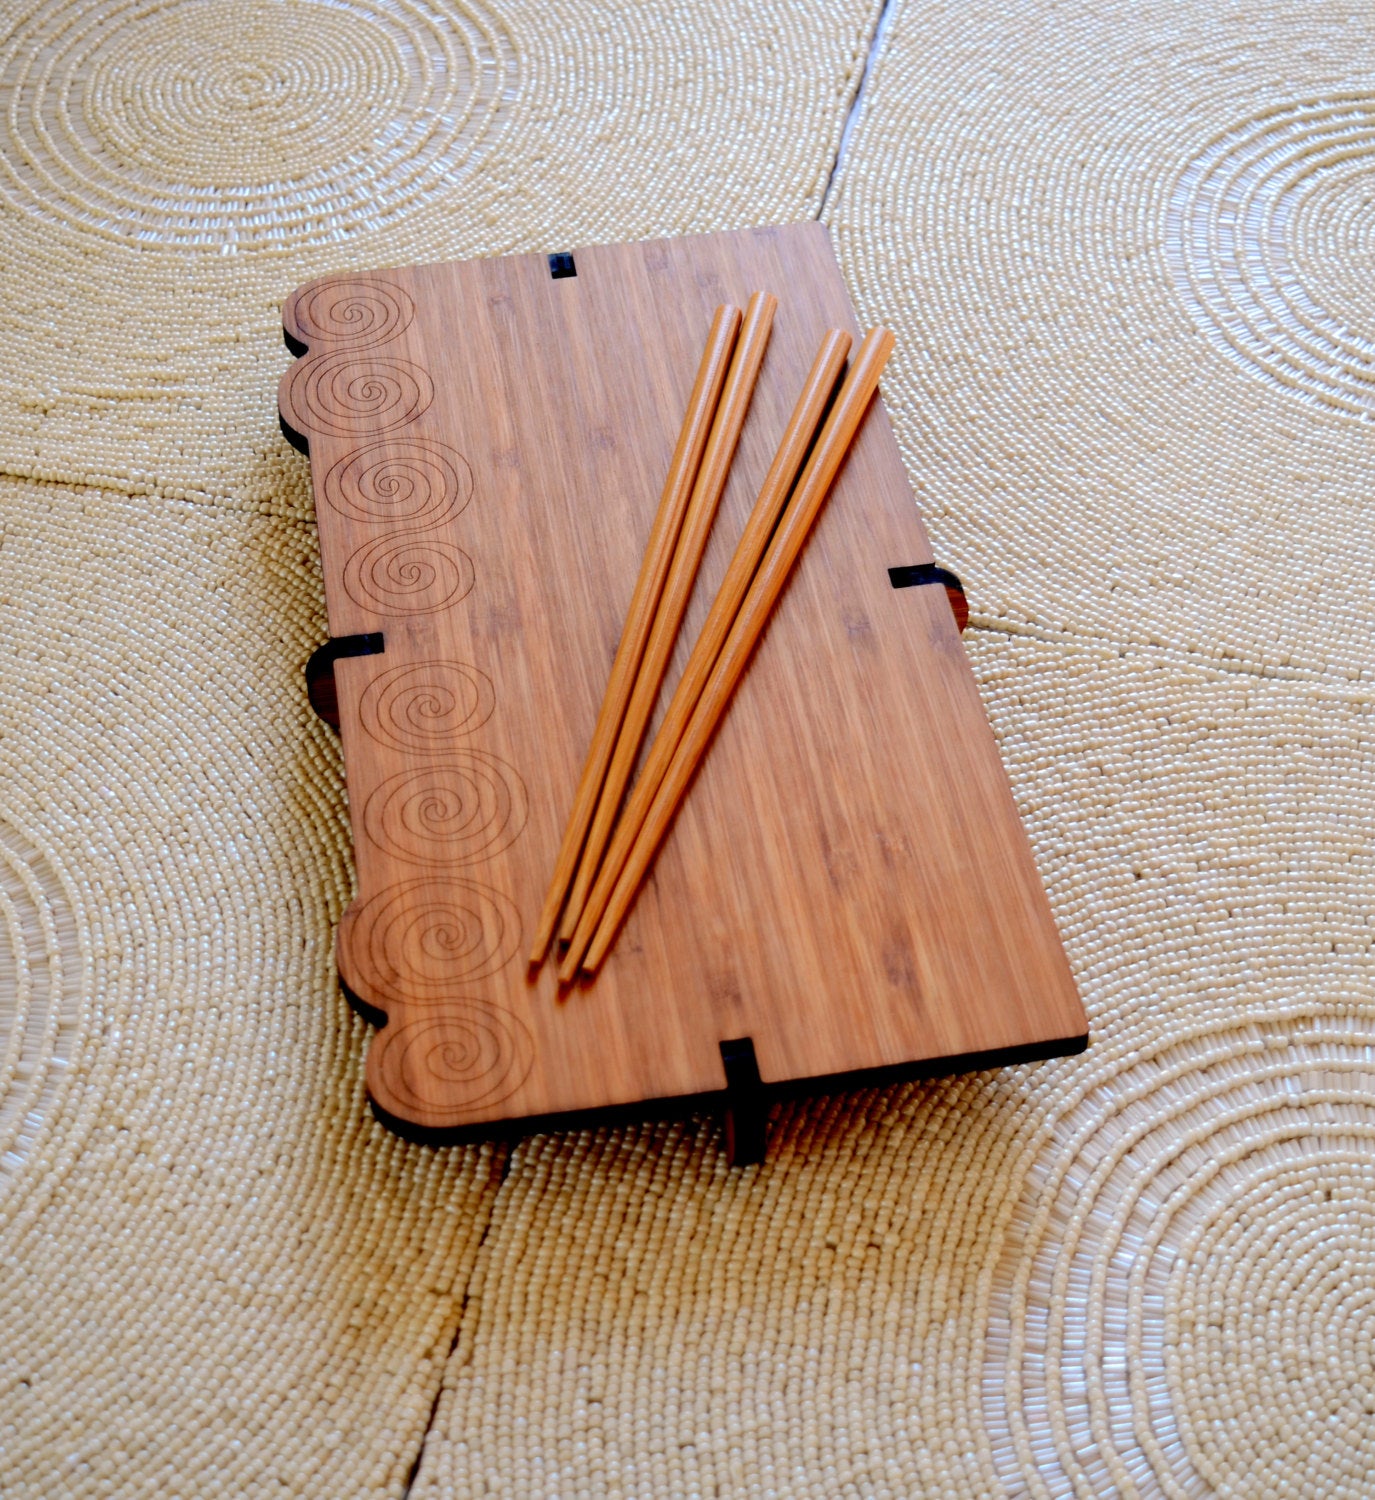 Bamboo Sushi Serving Sets - BagLunchproduct,corp